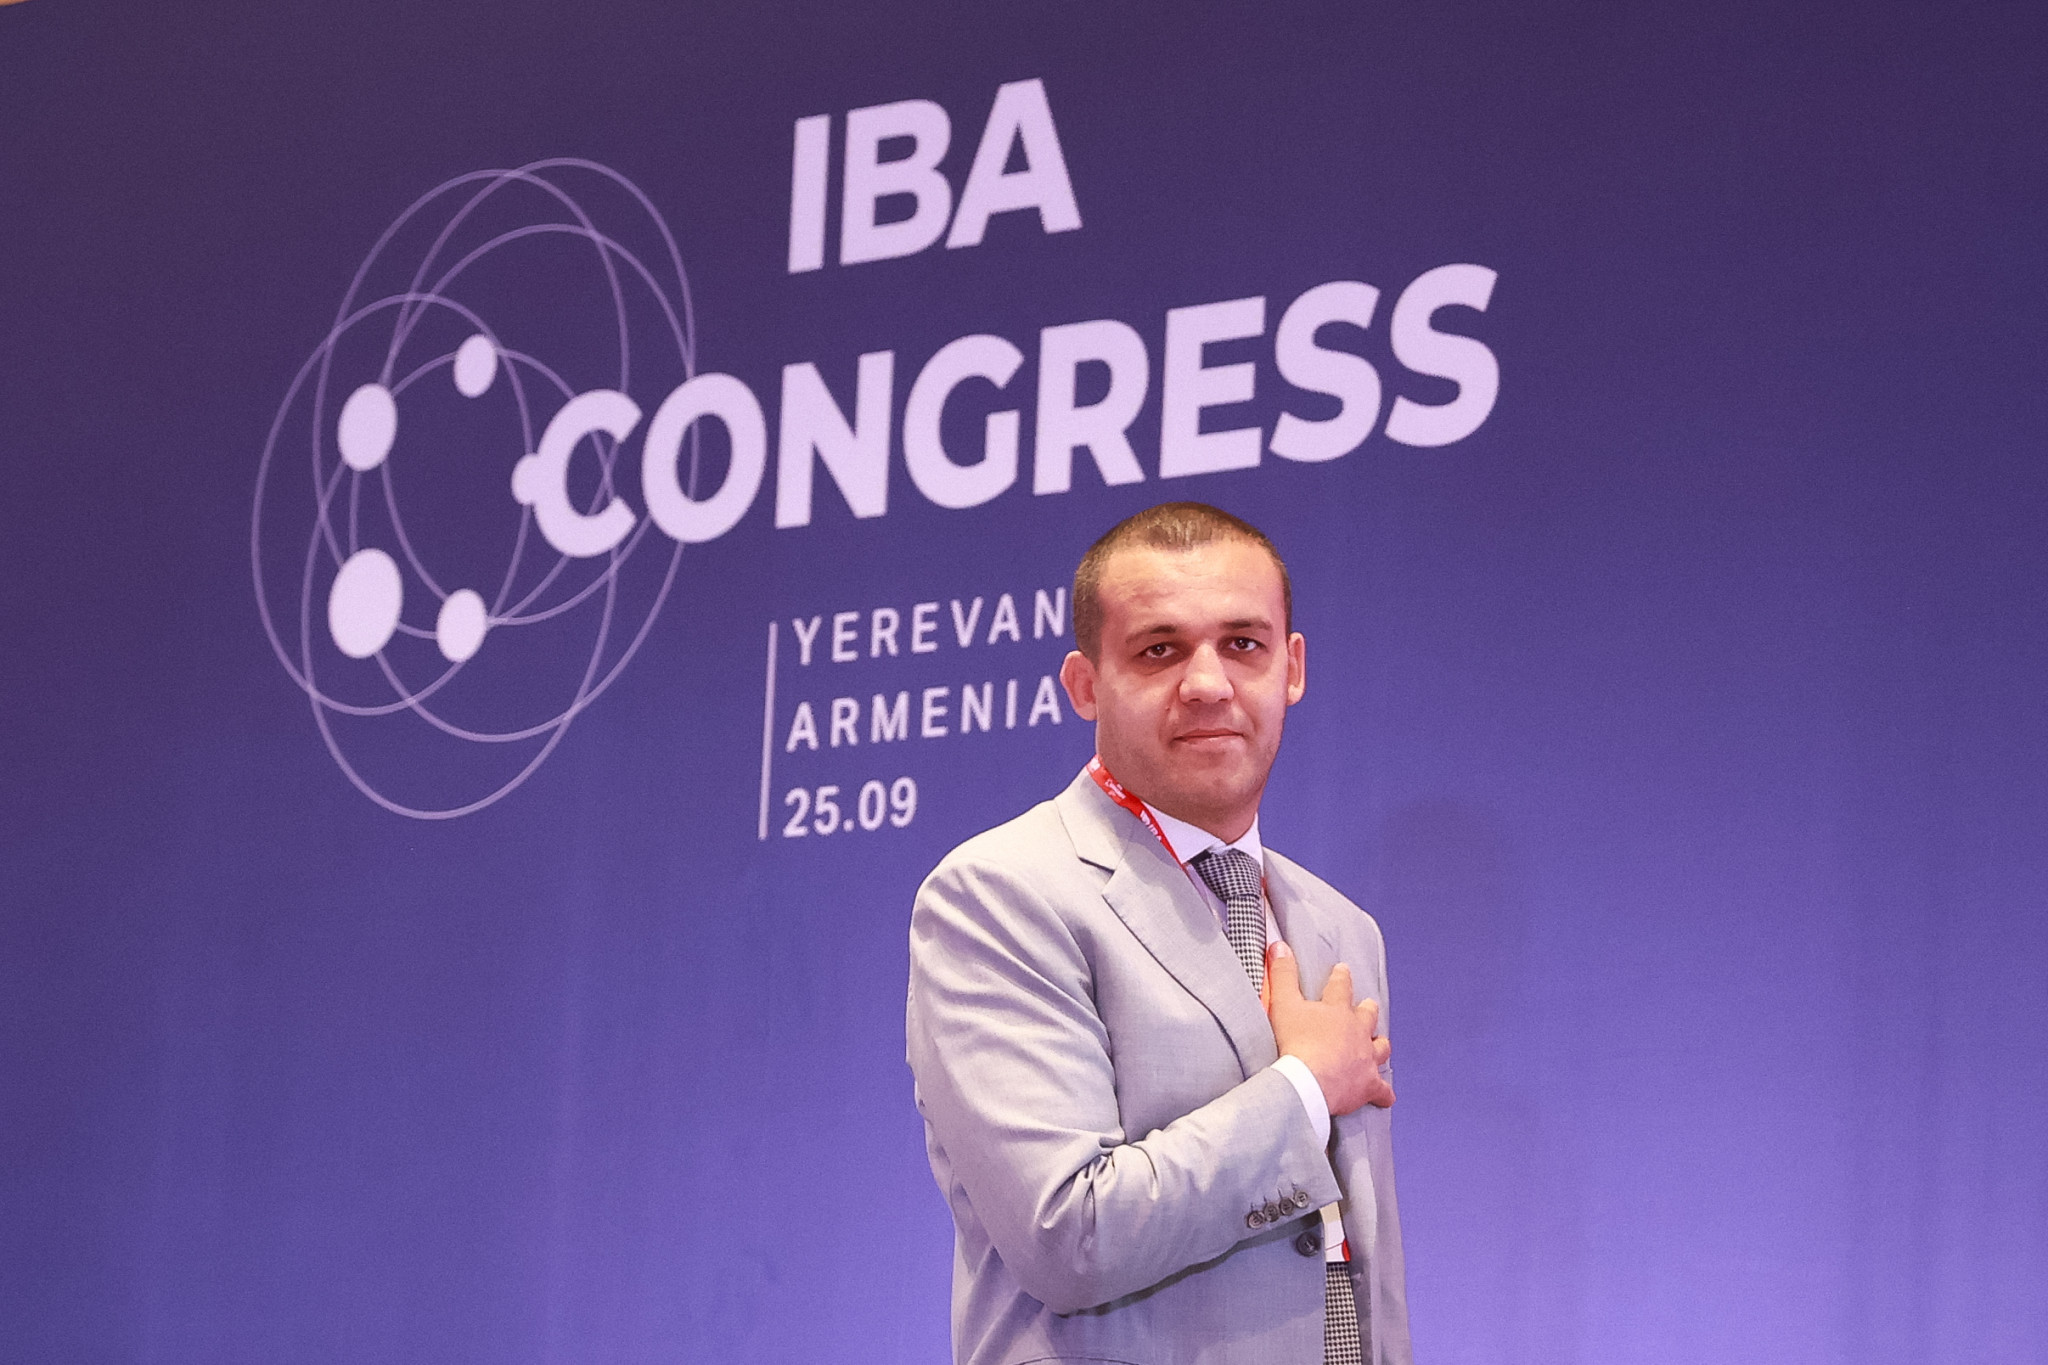 George Yerolimpos argued that yesterday's IBA Extraordinary Congress 